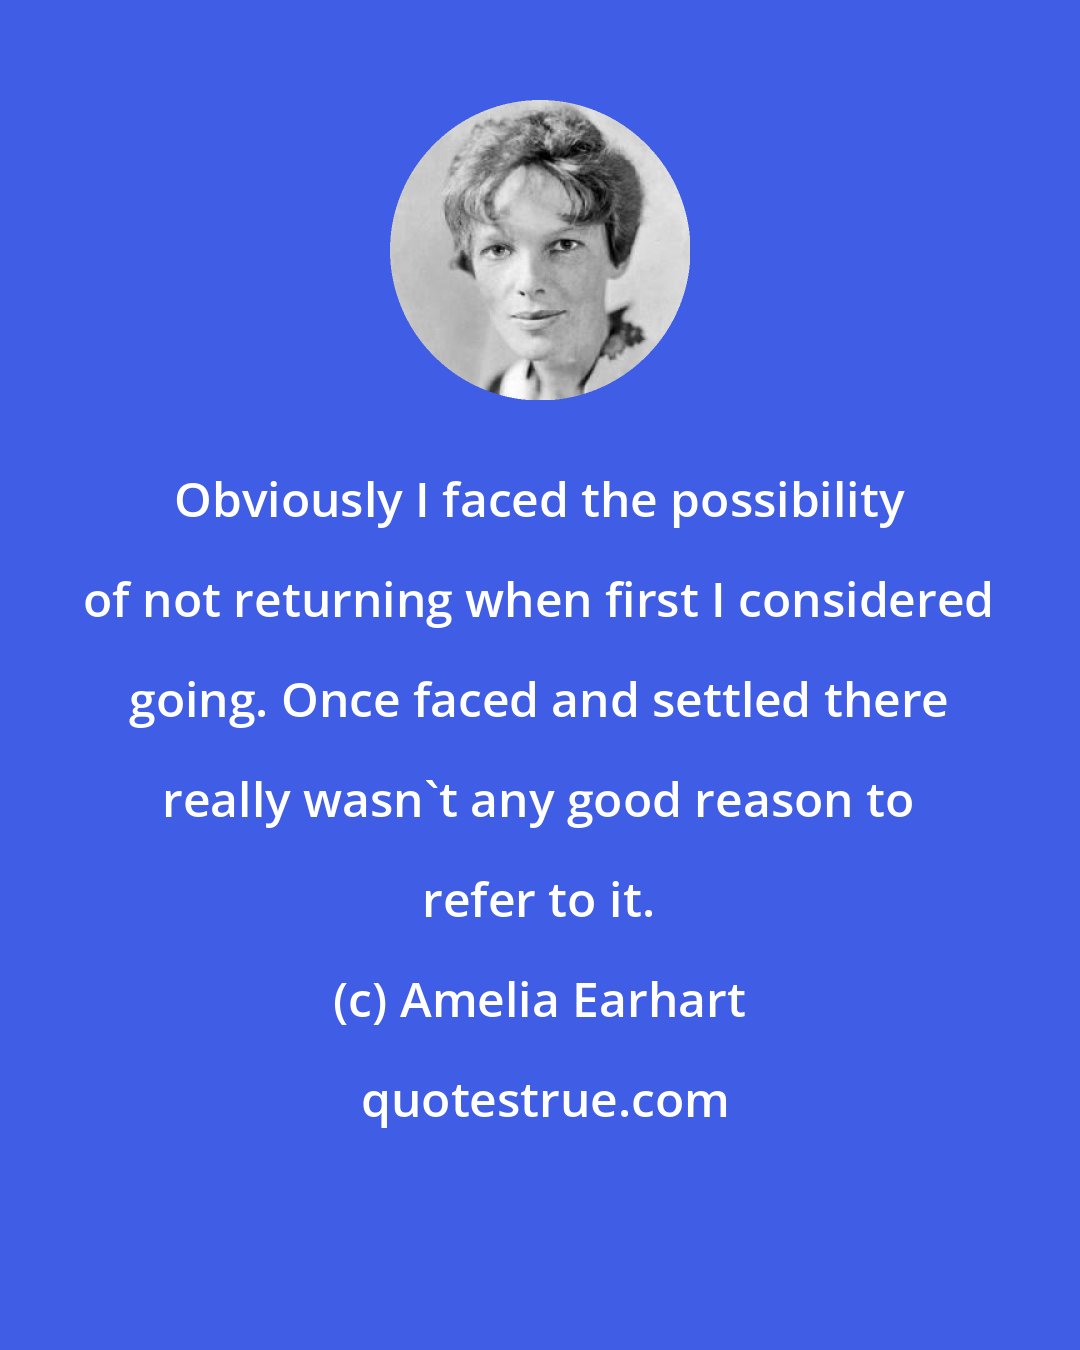 Amelia Earhart: Obviously I faced the possibility of not returning when first I considered going. Once faced and settled there really wasn't any good reason to refer to it.